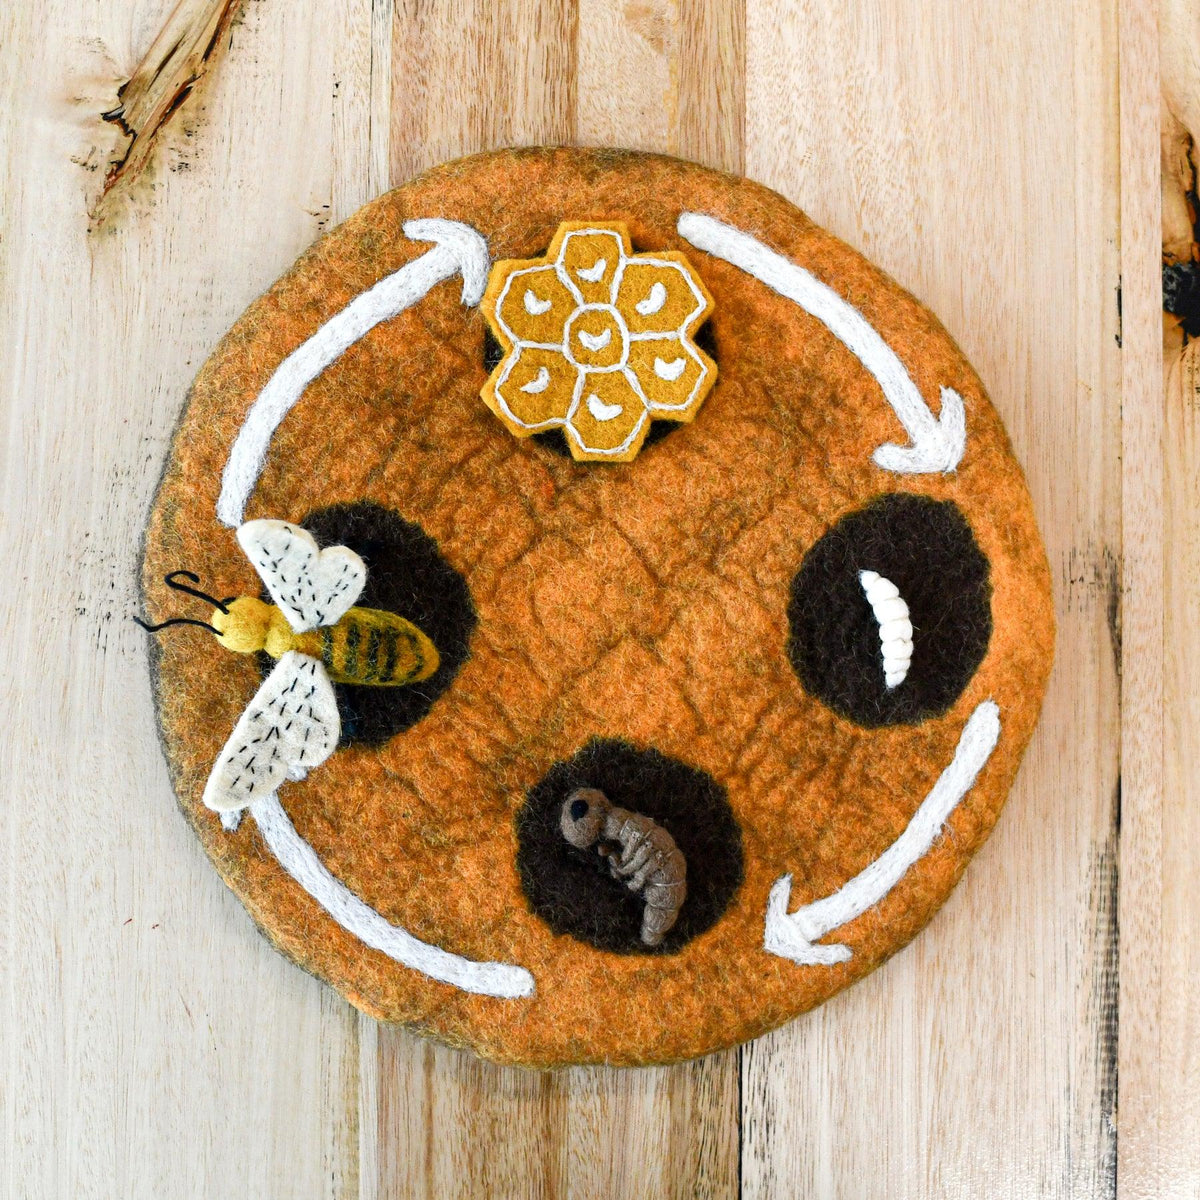 Lifecycle of a Honey Bee